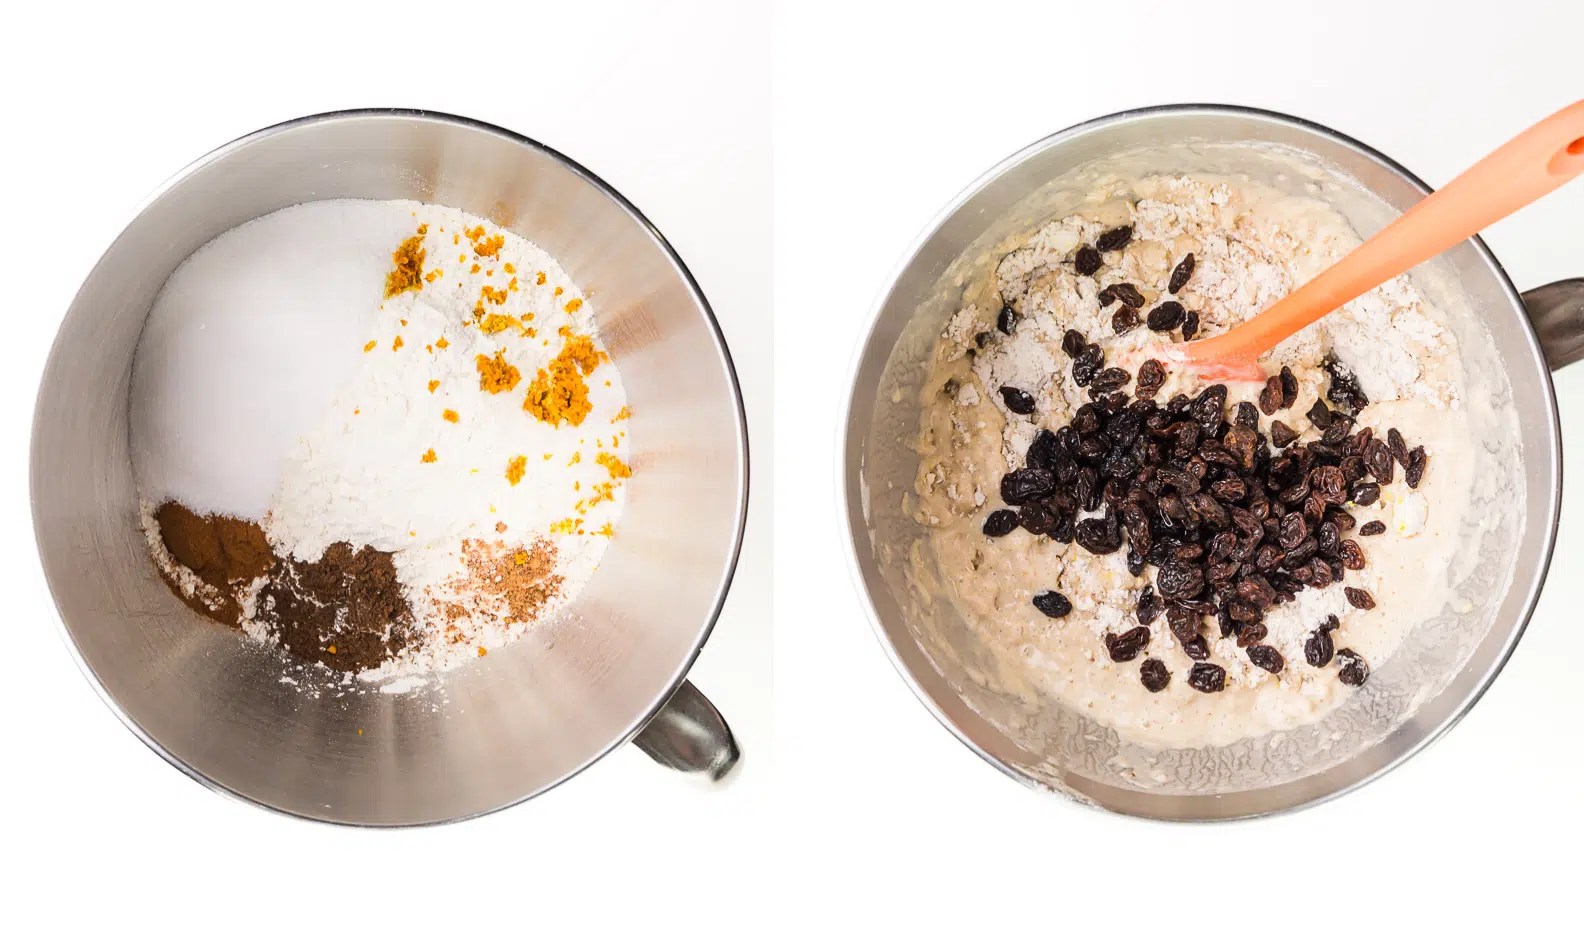 A collage of two images shows a bowl with flour and other ingredients on the left and dough with raisins and an orange spatula on the right.